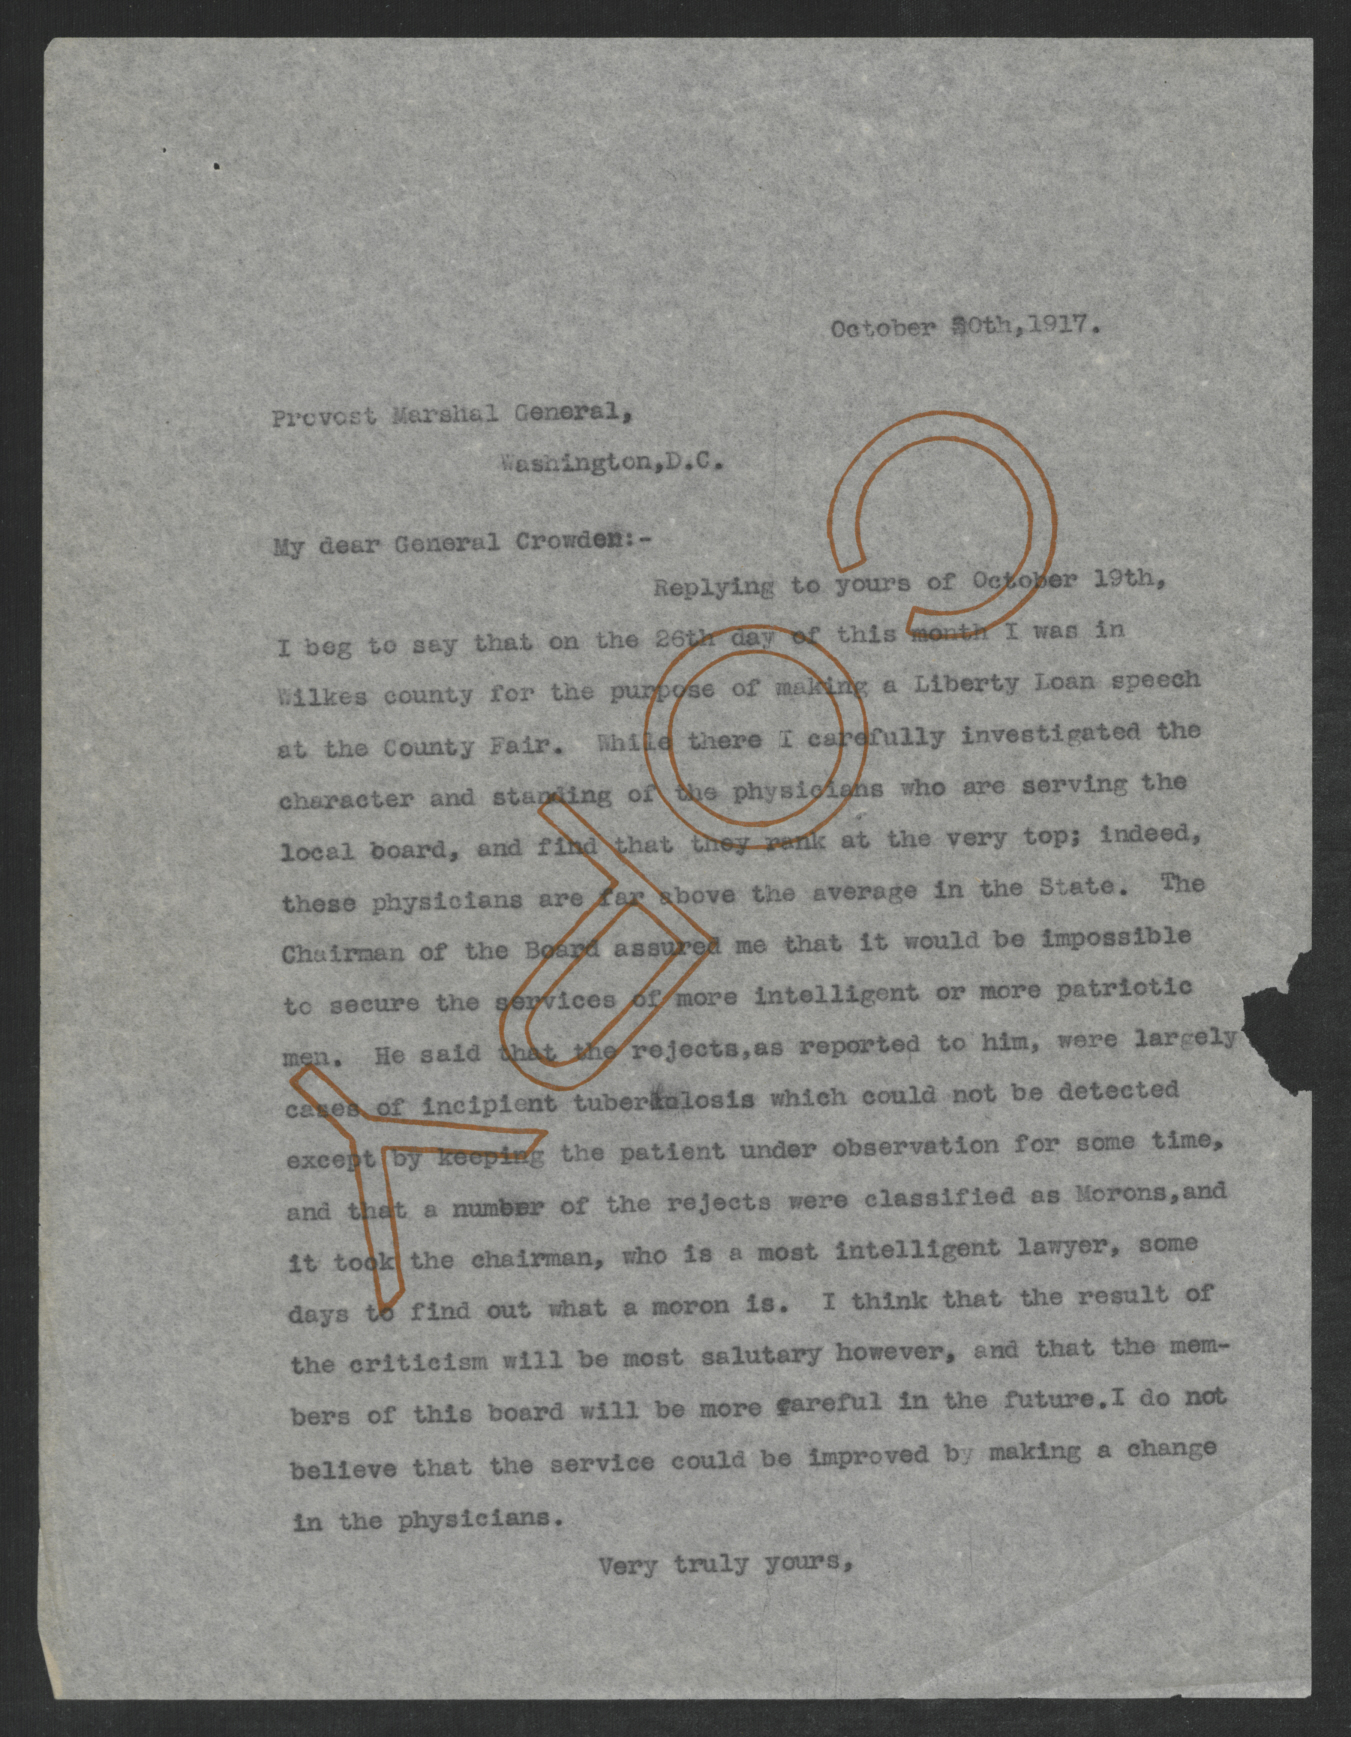 Letter from Thomas W. Bickett to Enoch H. Crowder, October 30, 1917